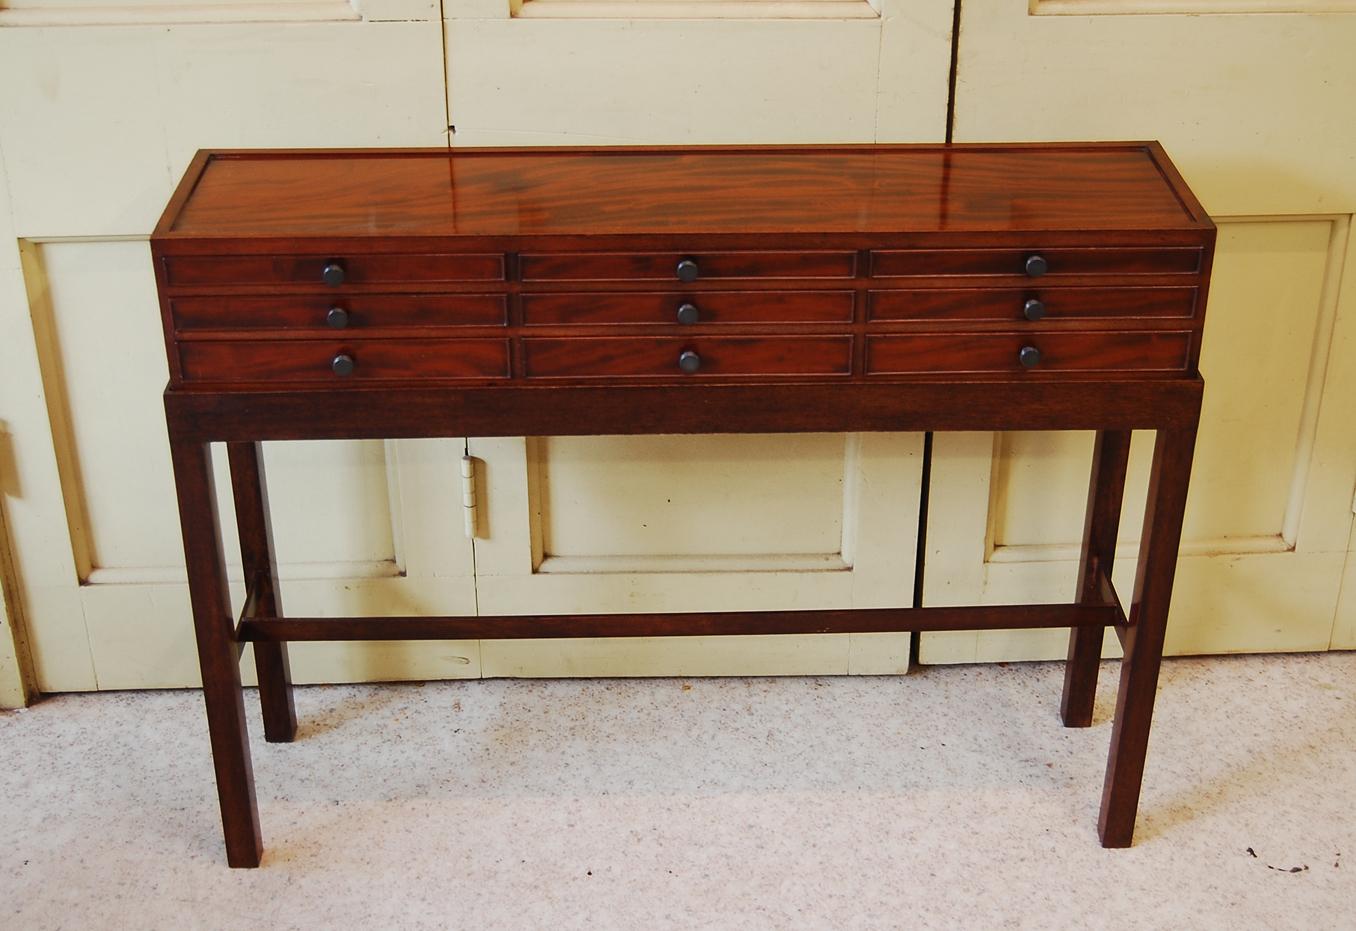 
 English Regency mahogany set of nine drawers made for a collector.  There are three vertical ranks of three drawers each, all finely dovetailed and graduated with the deepest at the bottom.  This lovely collectors box is finished all around so it